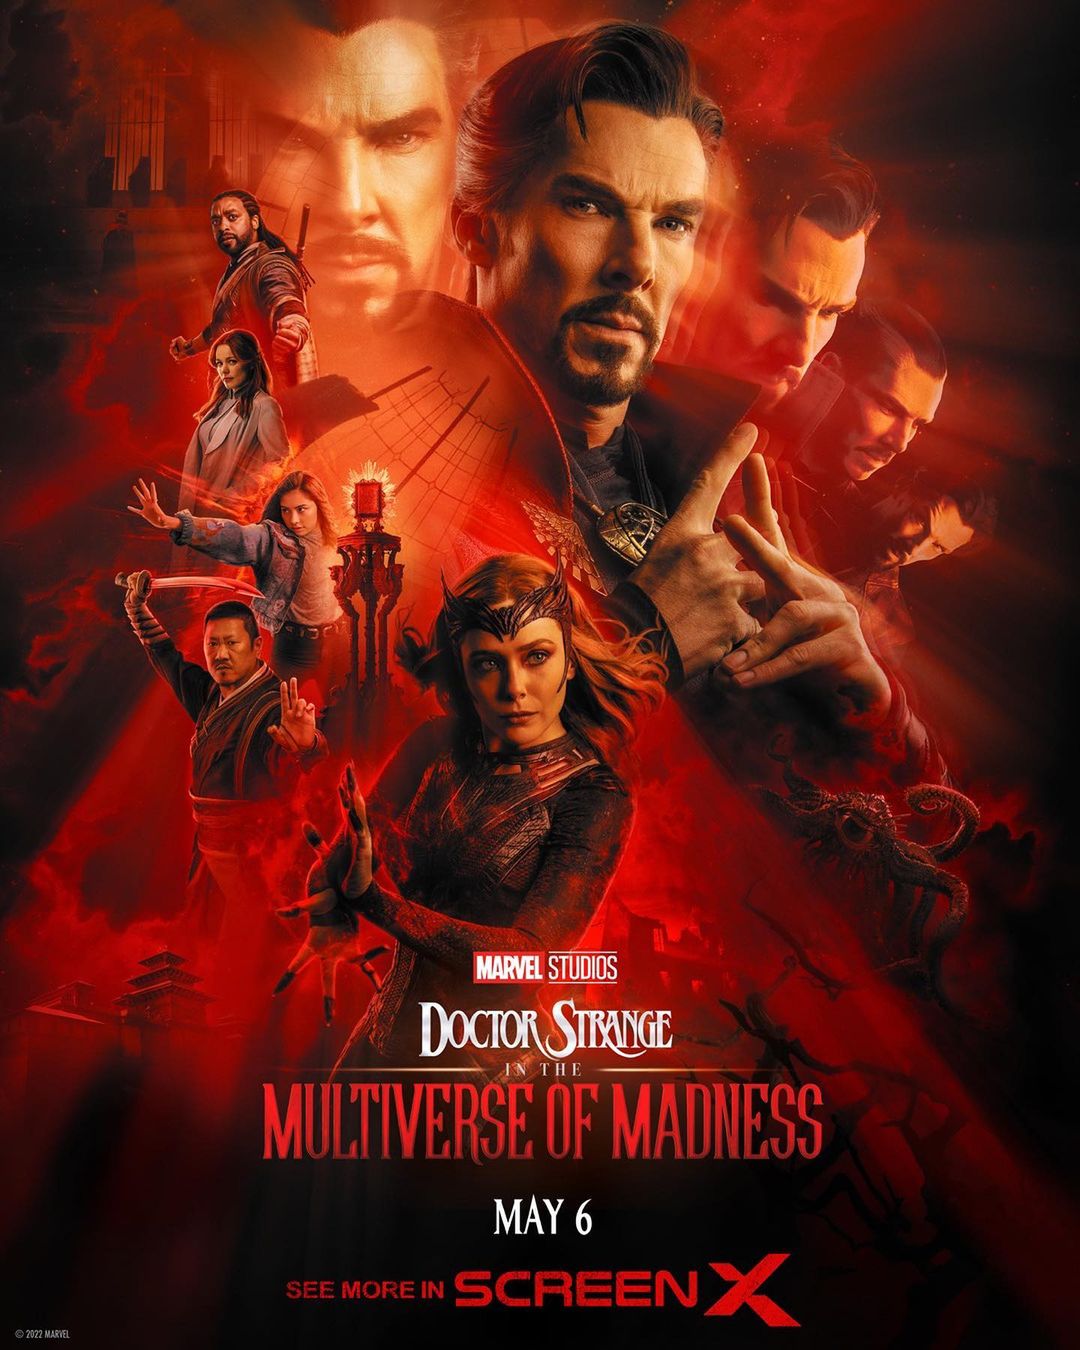 Multiverse of Madness